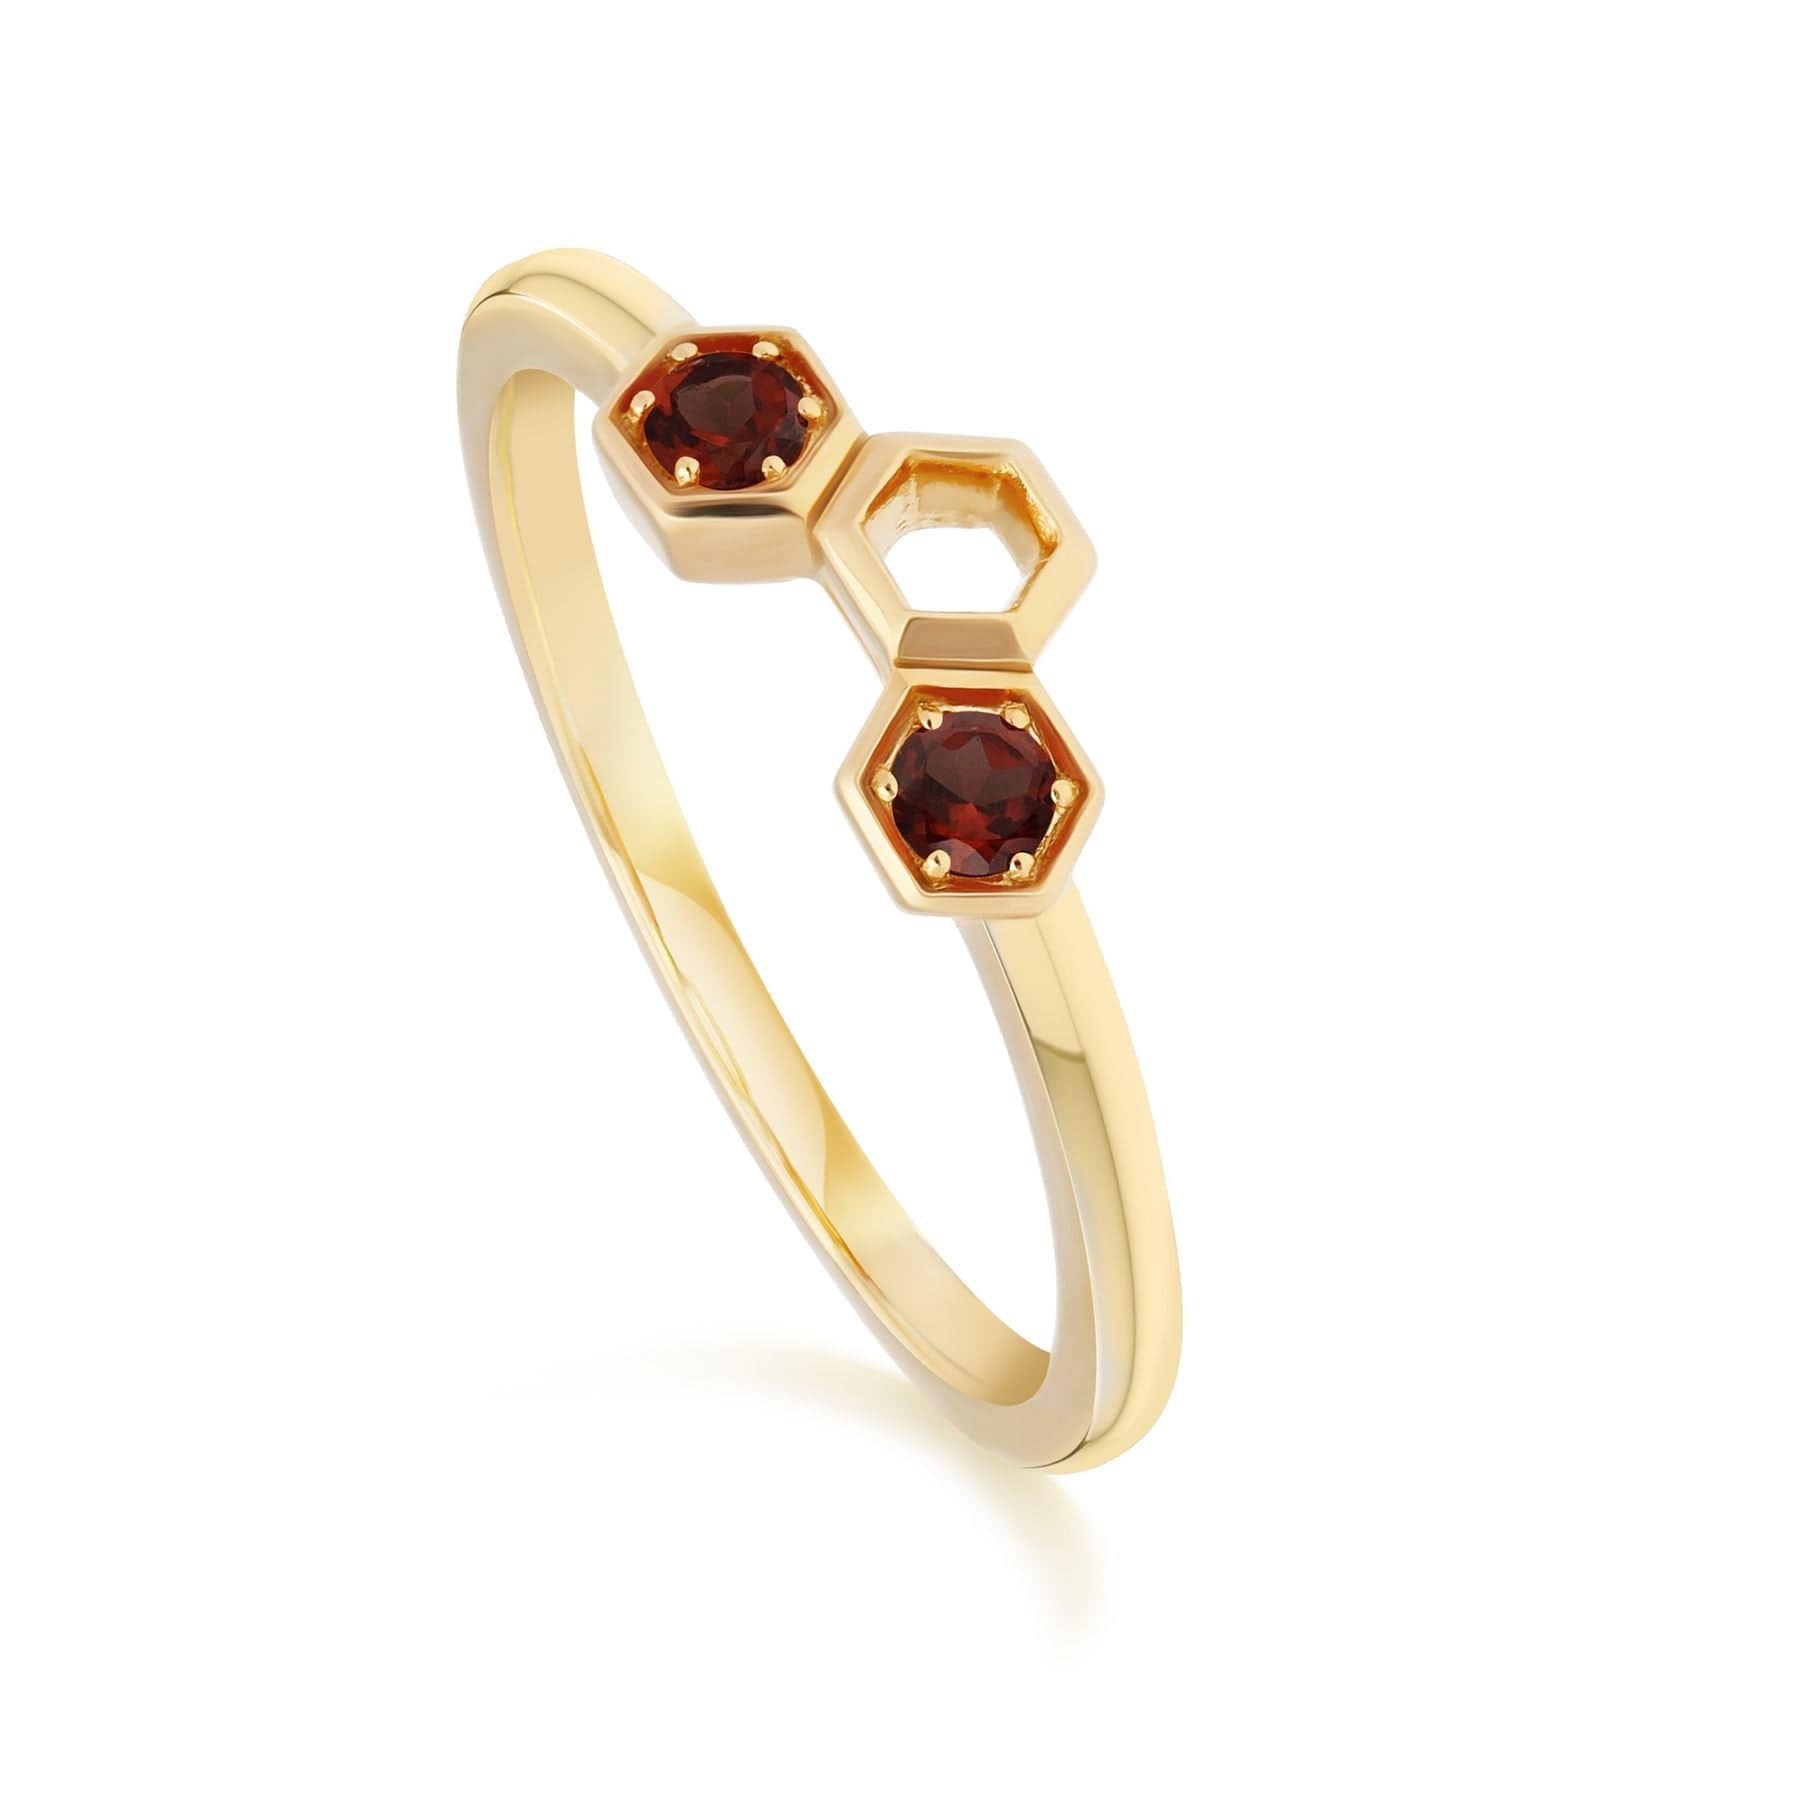 Honeycomb Inspired Garnet Stack Ring in 9ct Yellow Gold